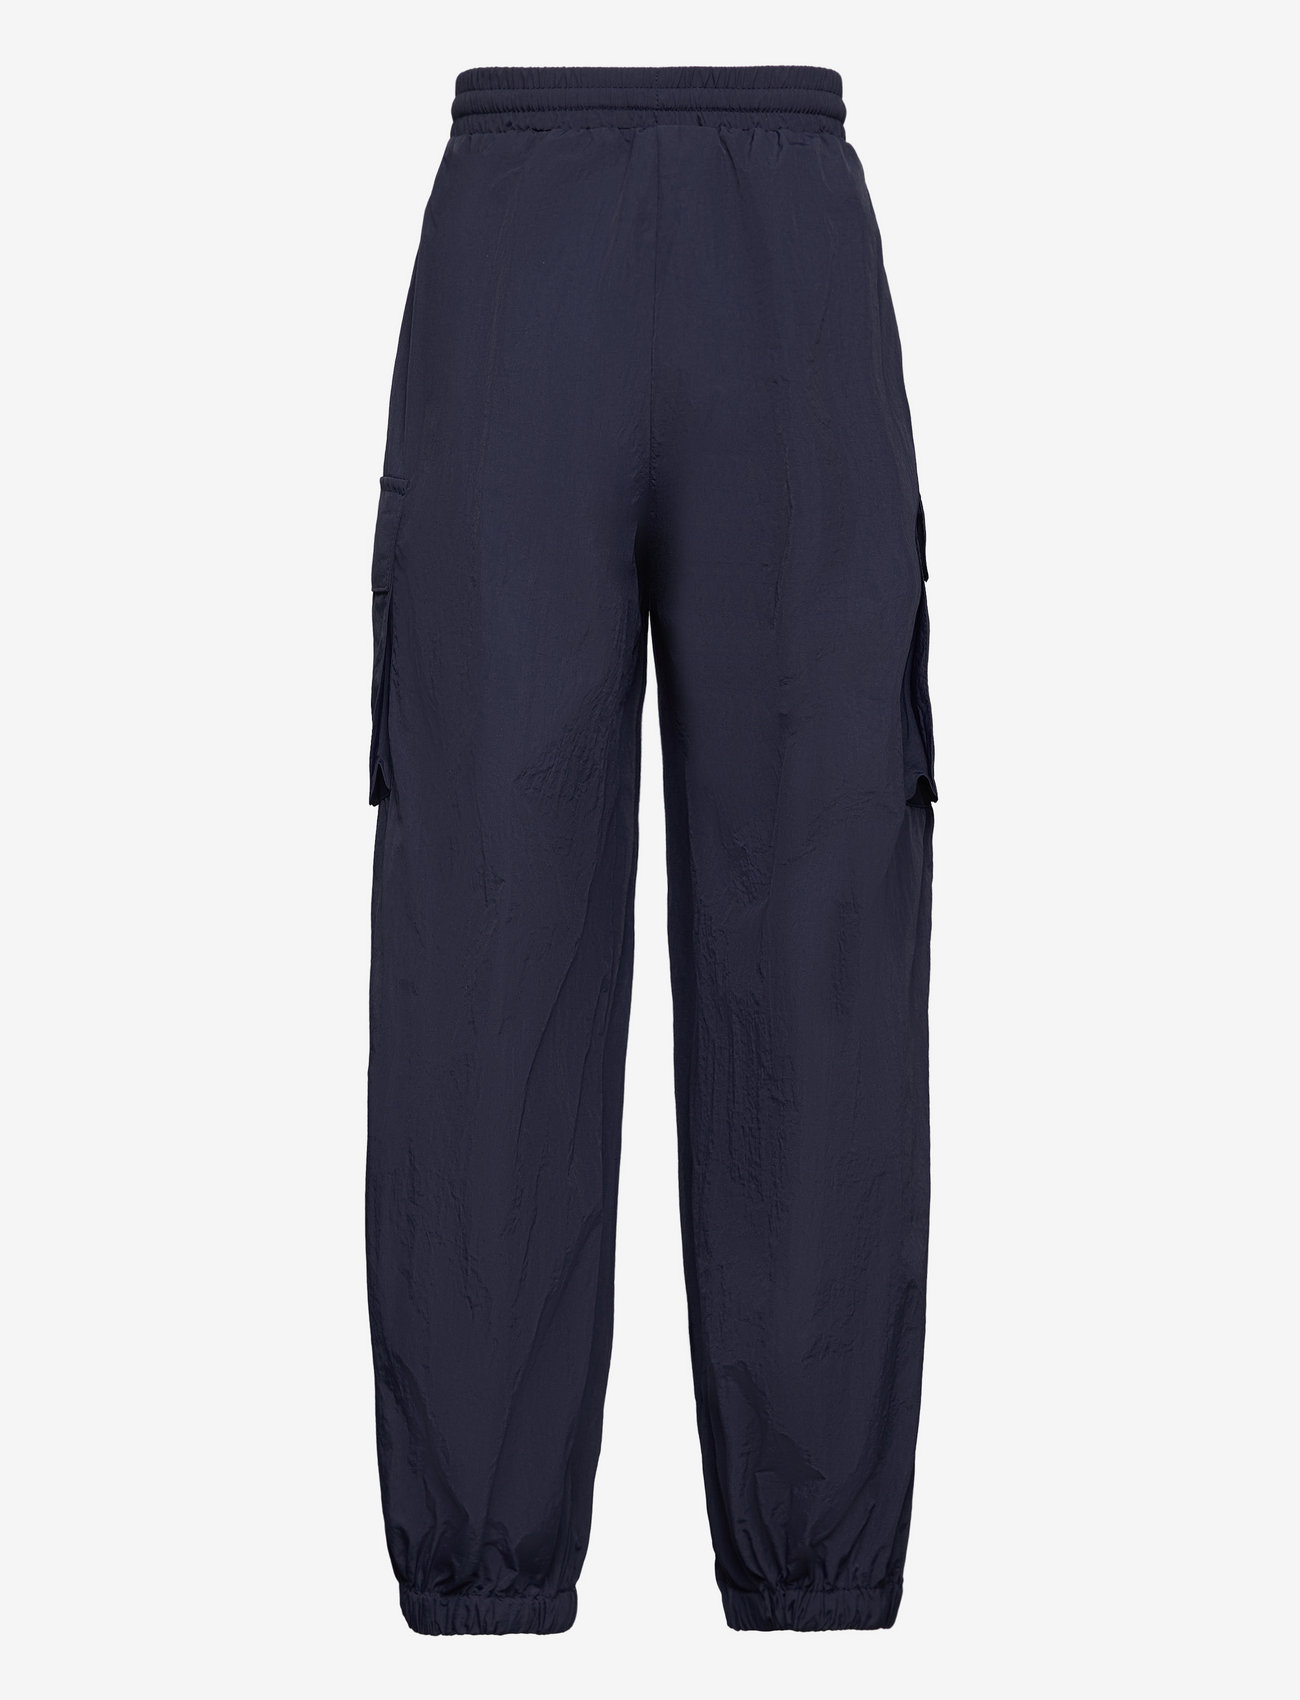 Sofie Schnoor Young - Trousers - pantalons - navy blue - 1